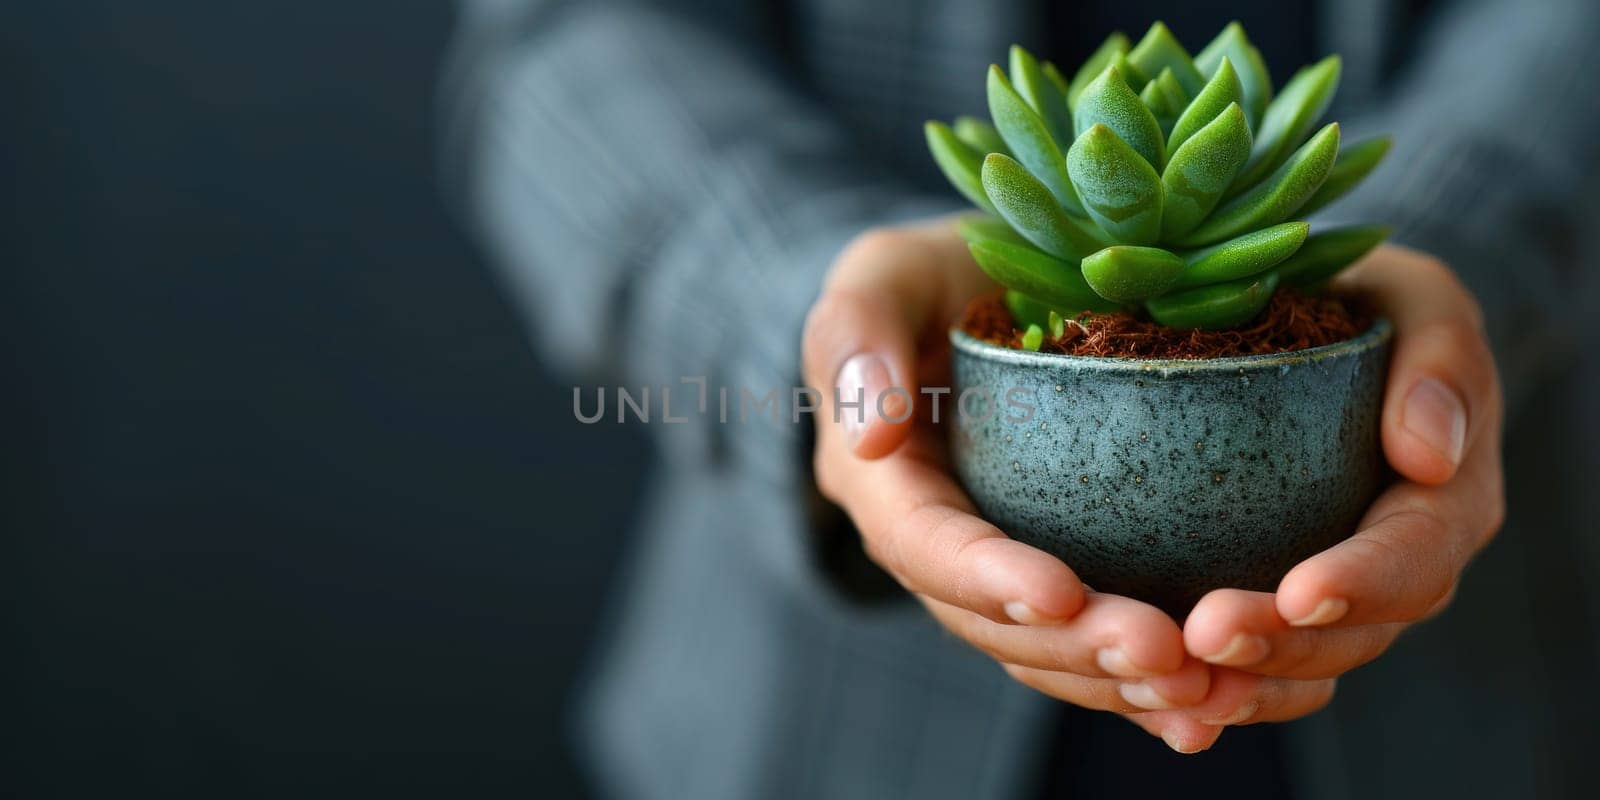 A person is holding a small plant in a blue pot.